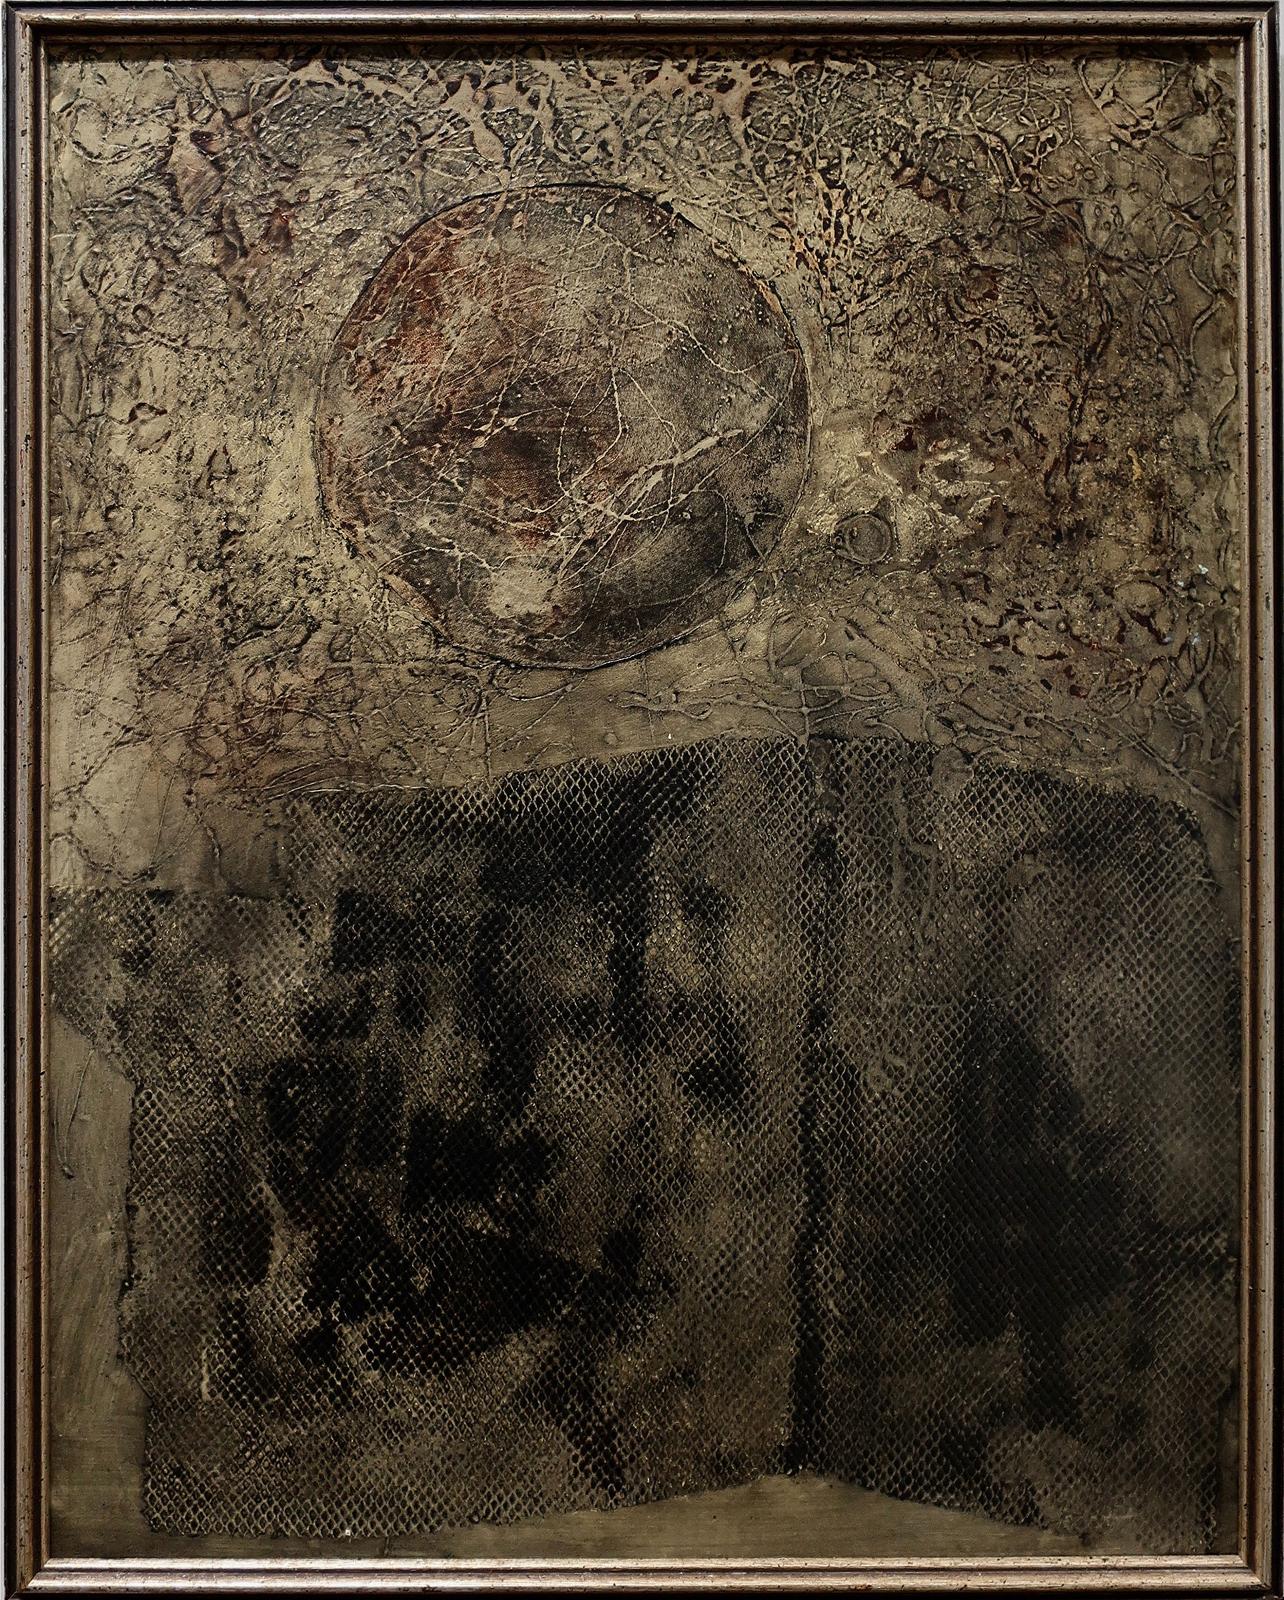 David Rabinowitch (1943) - Untitled (Abstract)